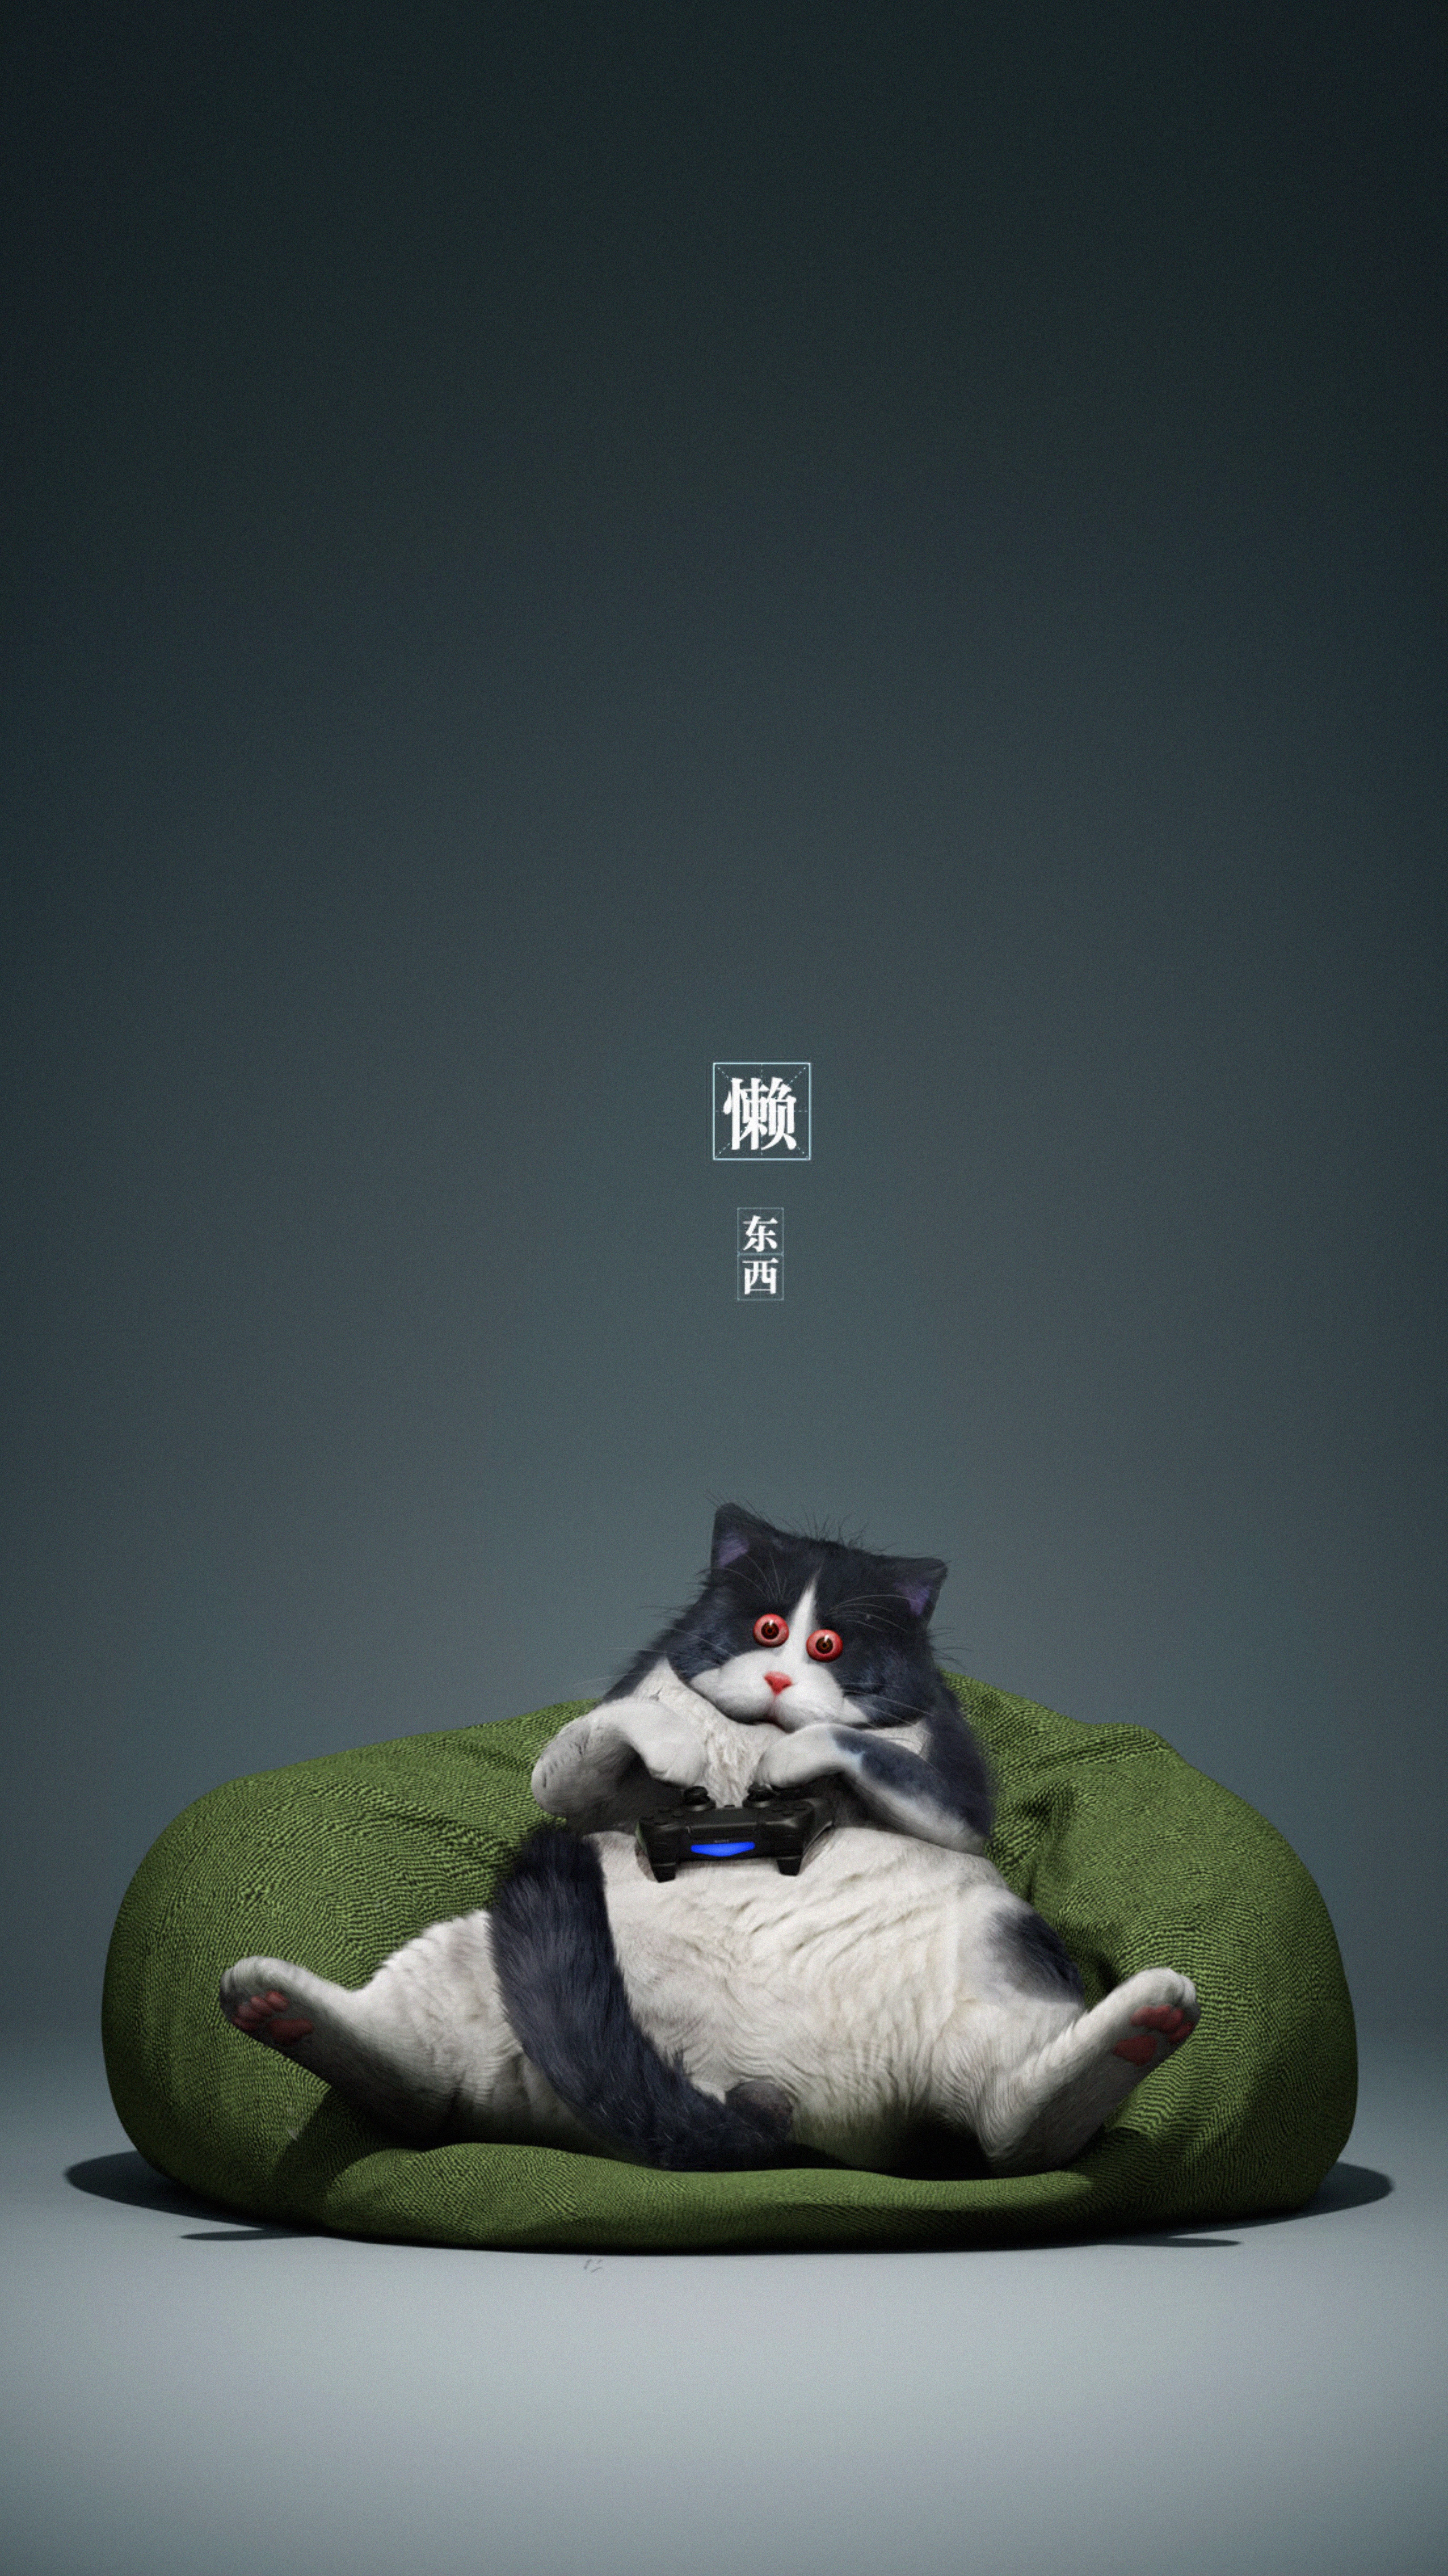 cool, funny, gamer, cat, miscellanea, miscellaneous, controller, gamepad phone background